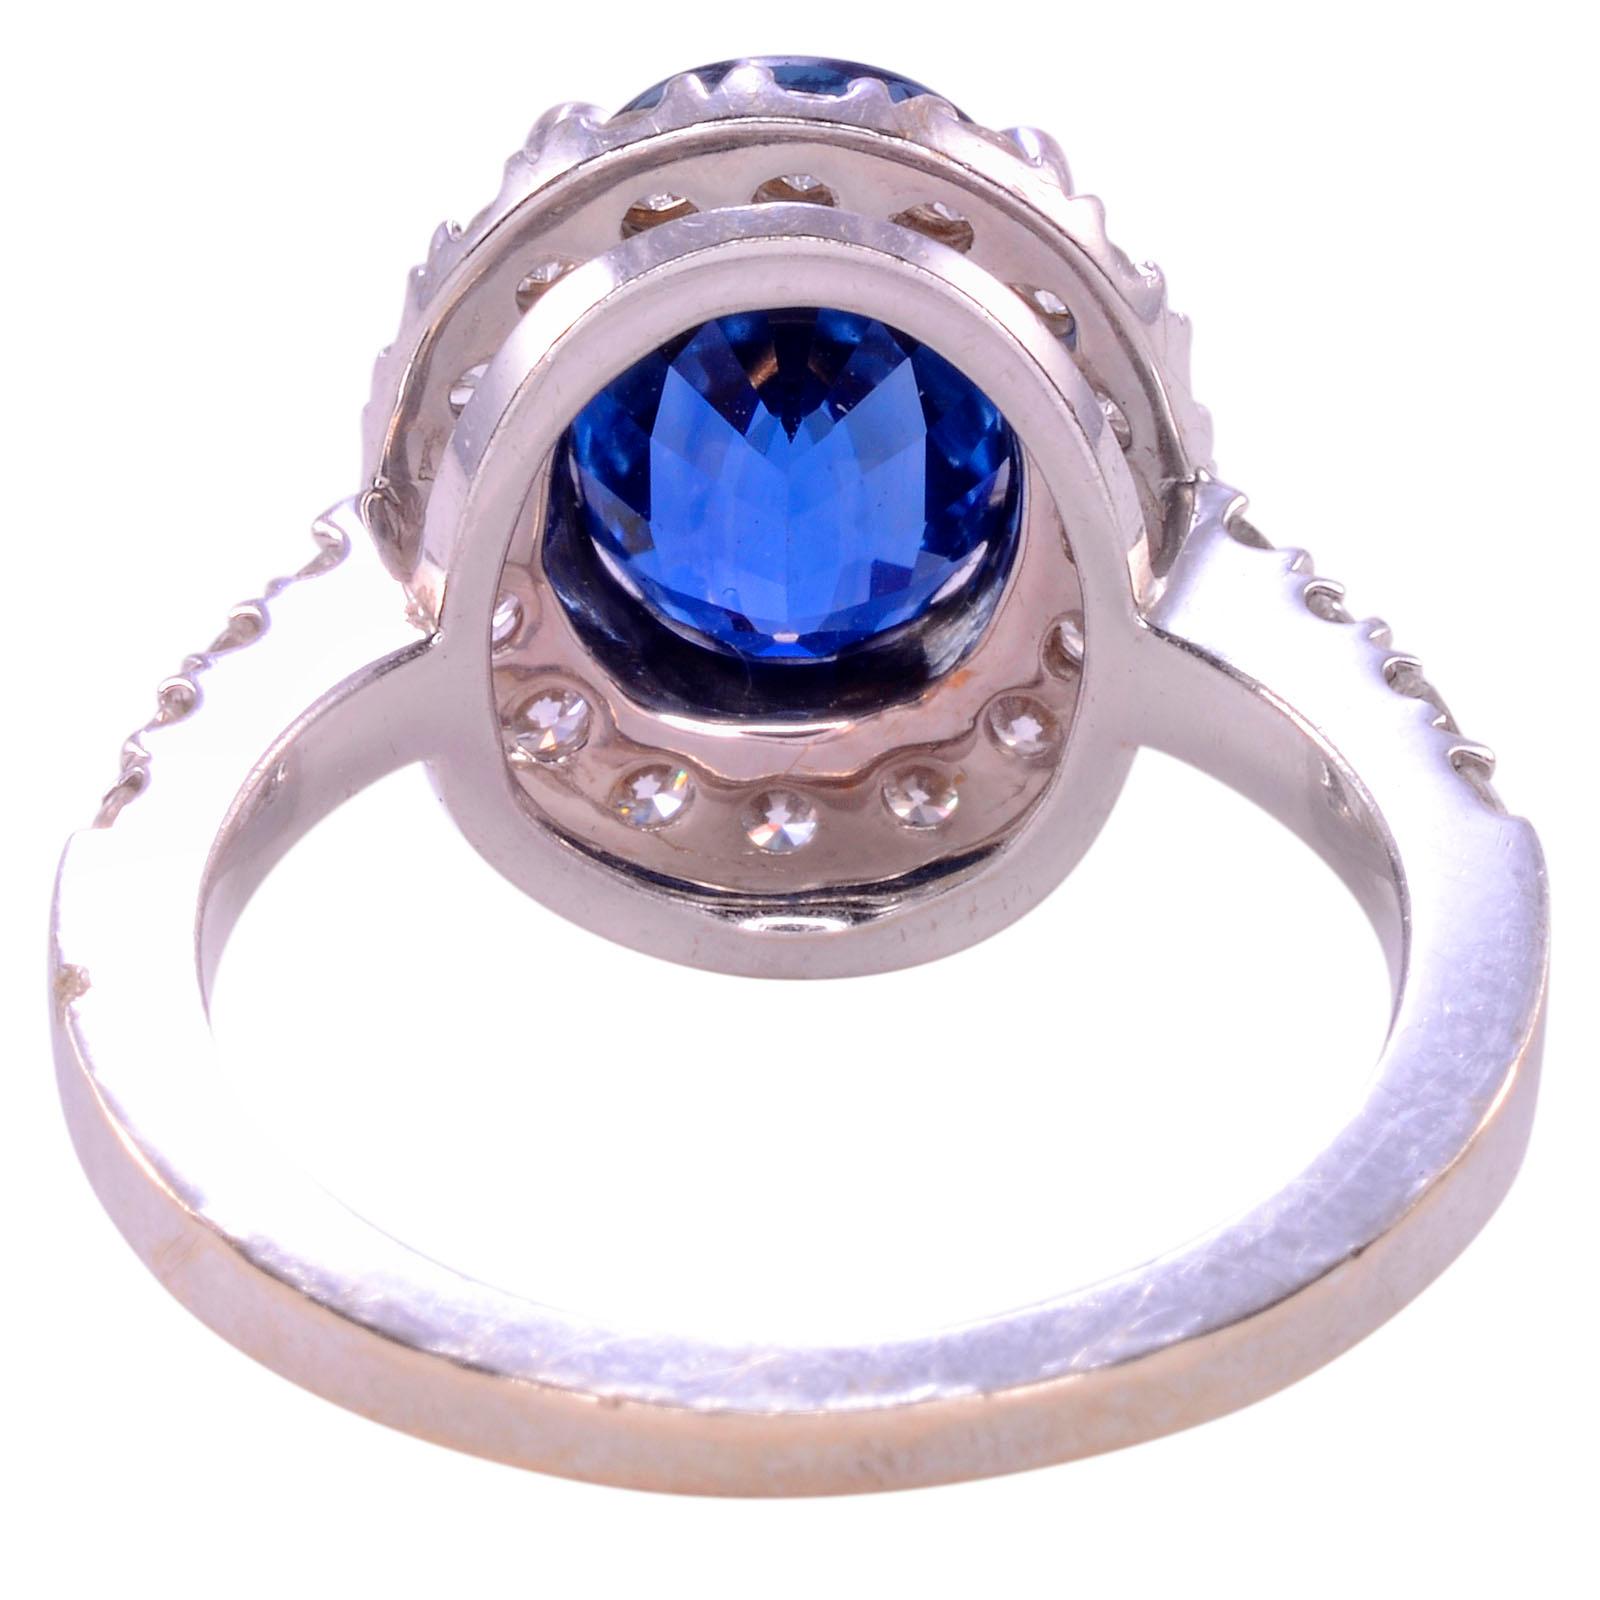 Oval Cut 4.40 Carat GIA Certified Natural Untreated Sapphire and Diamond Ring